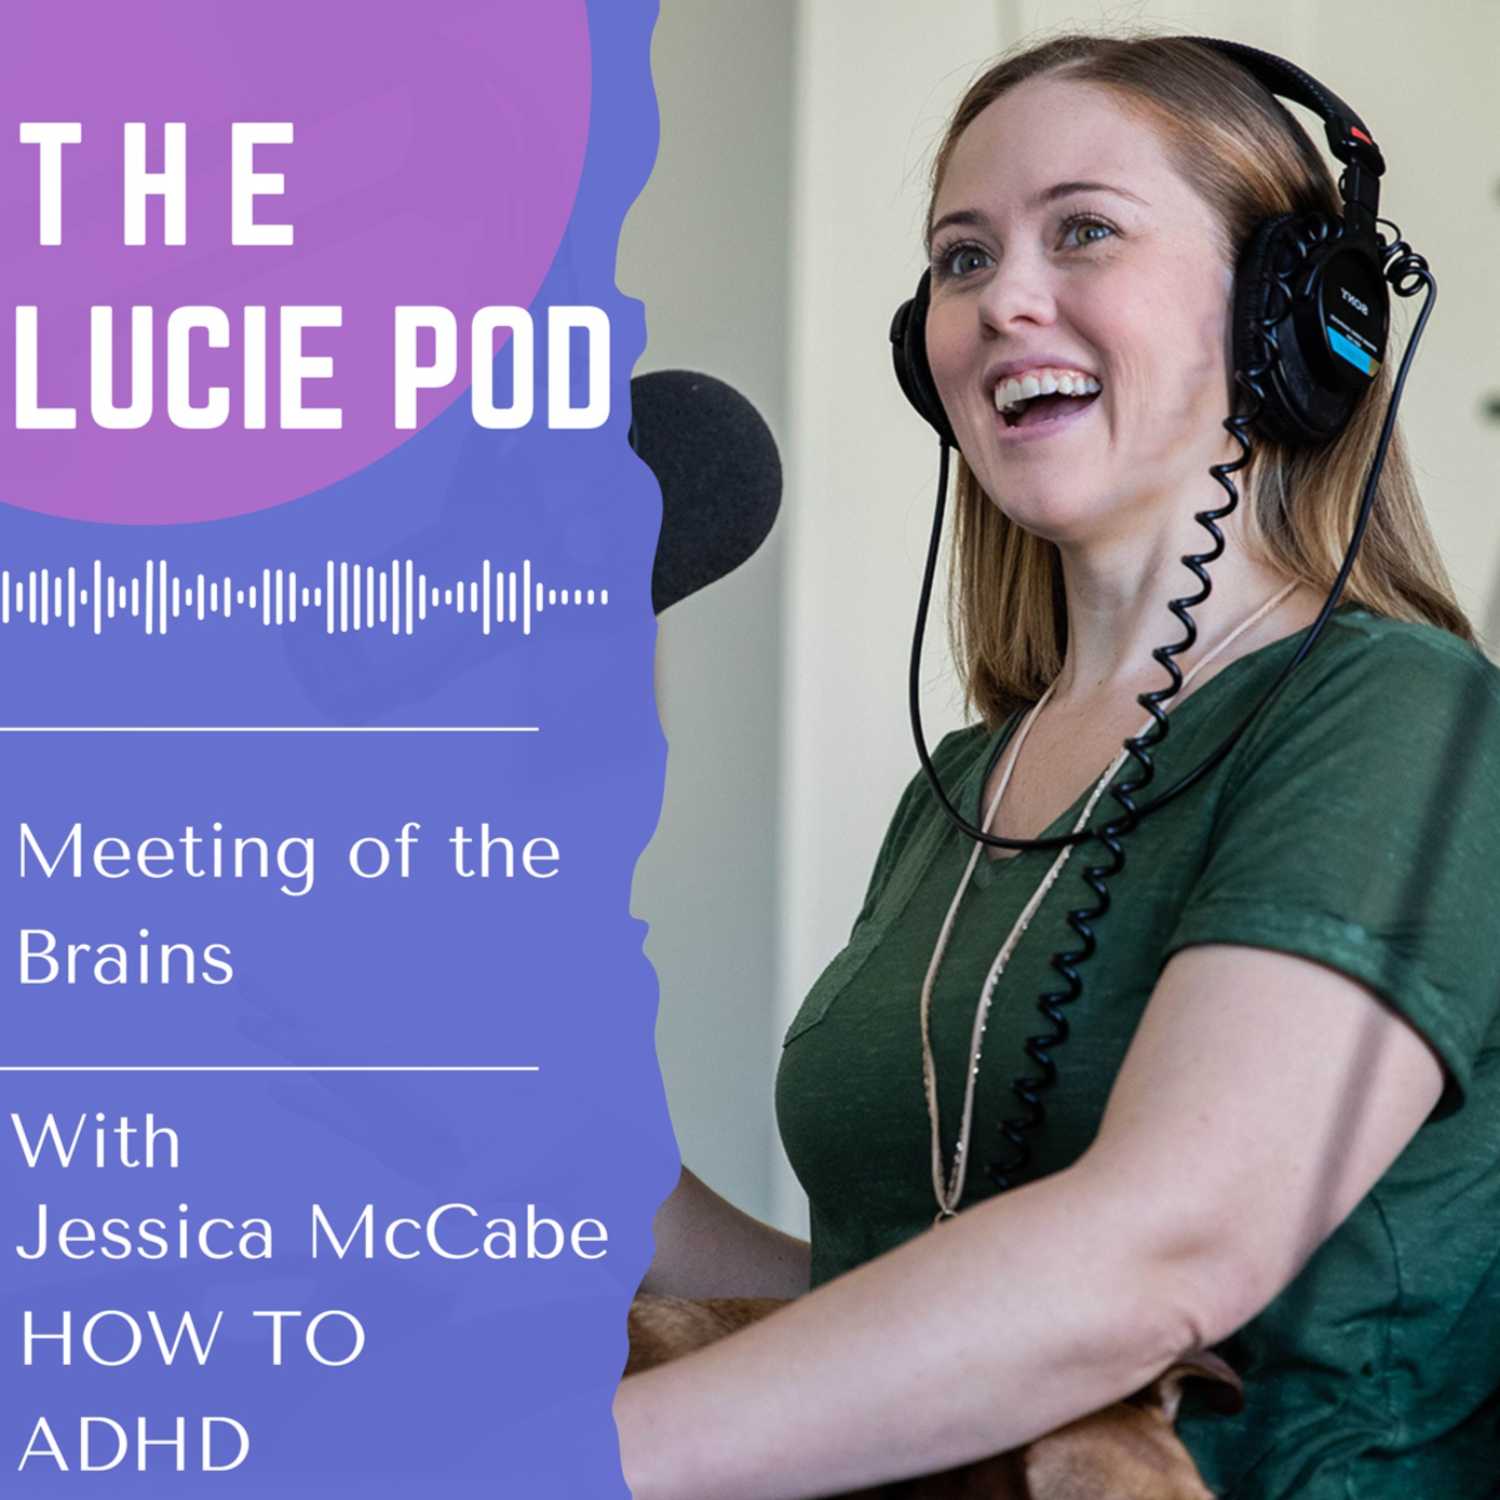 Meeting of the Brains with Jessica McCabe from How to ADHD